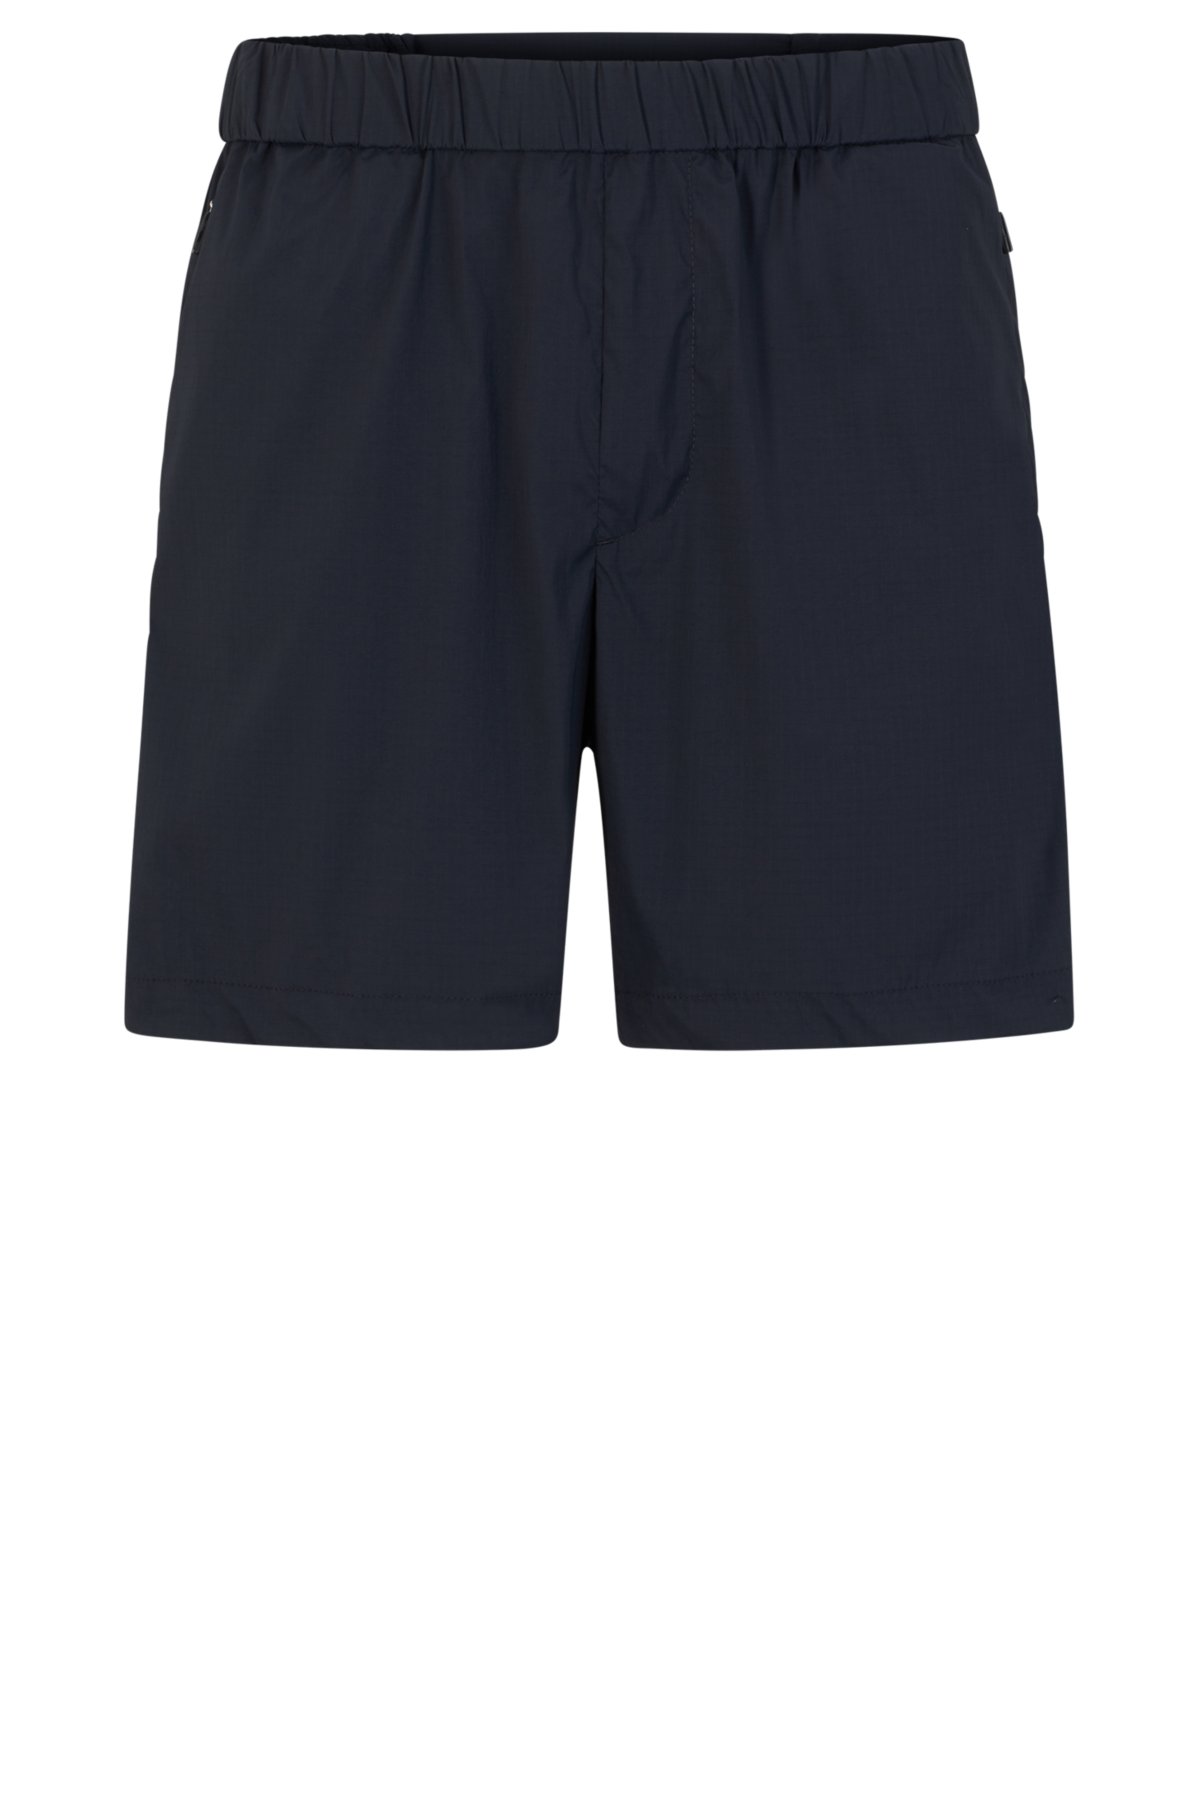 BOSS - Regular-fit shorts in cotton toweling with drawcord